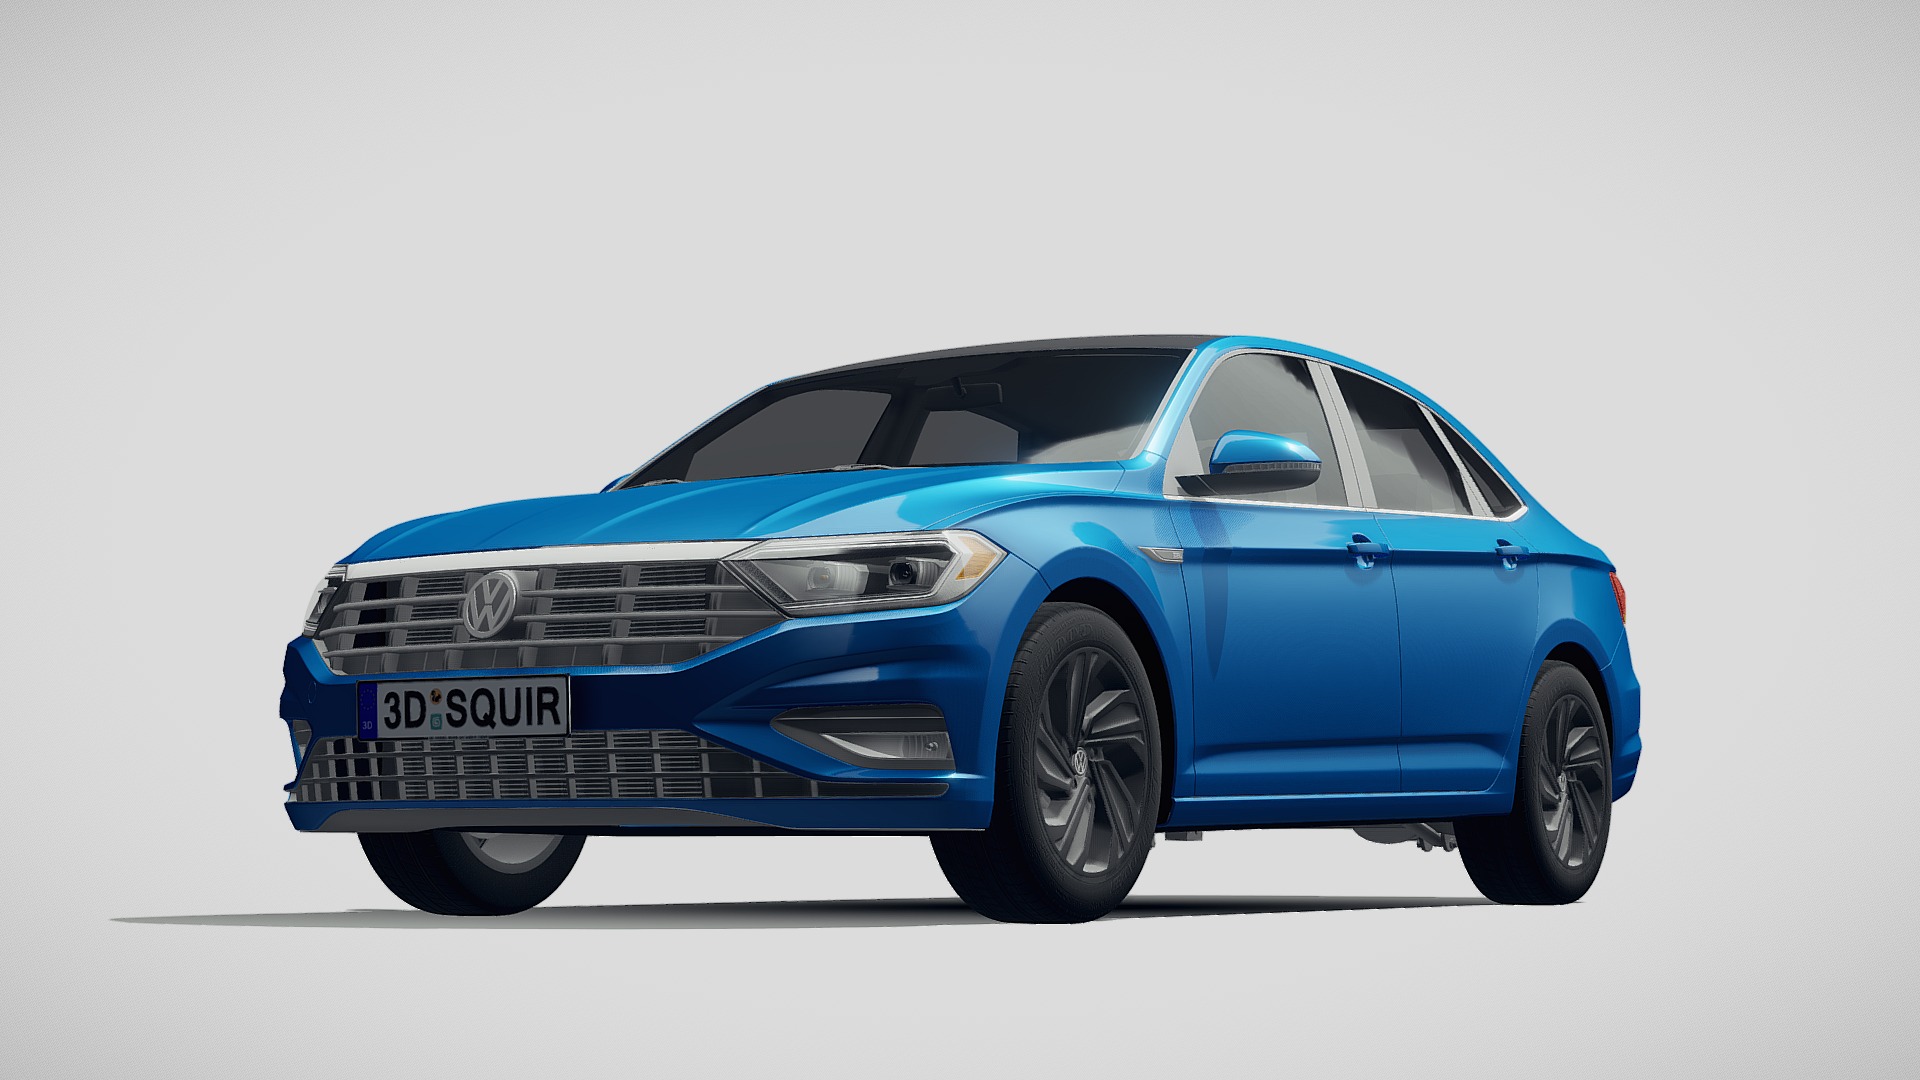 3D model Volkswagen Jetta 2019 - This is a 3D model of the Volkswagen Jetta 2019. The 3D model is about a blue car with a white background.